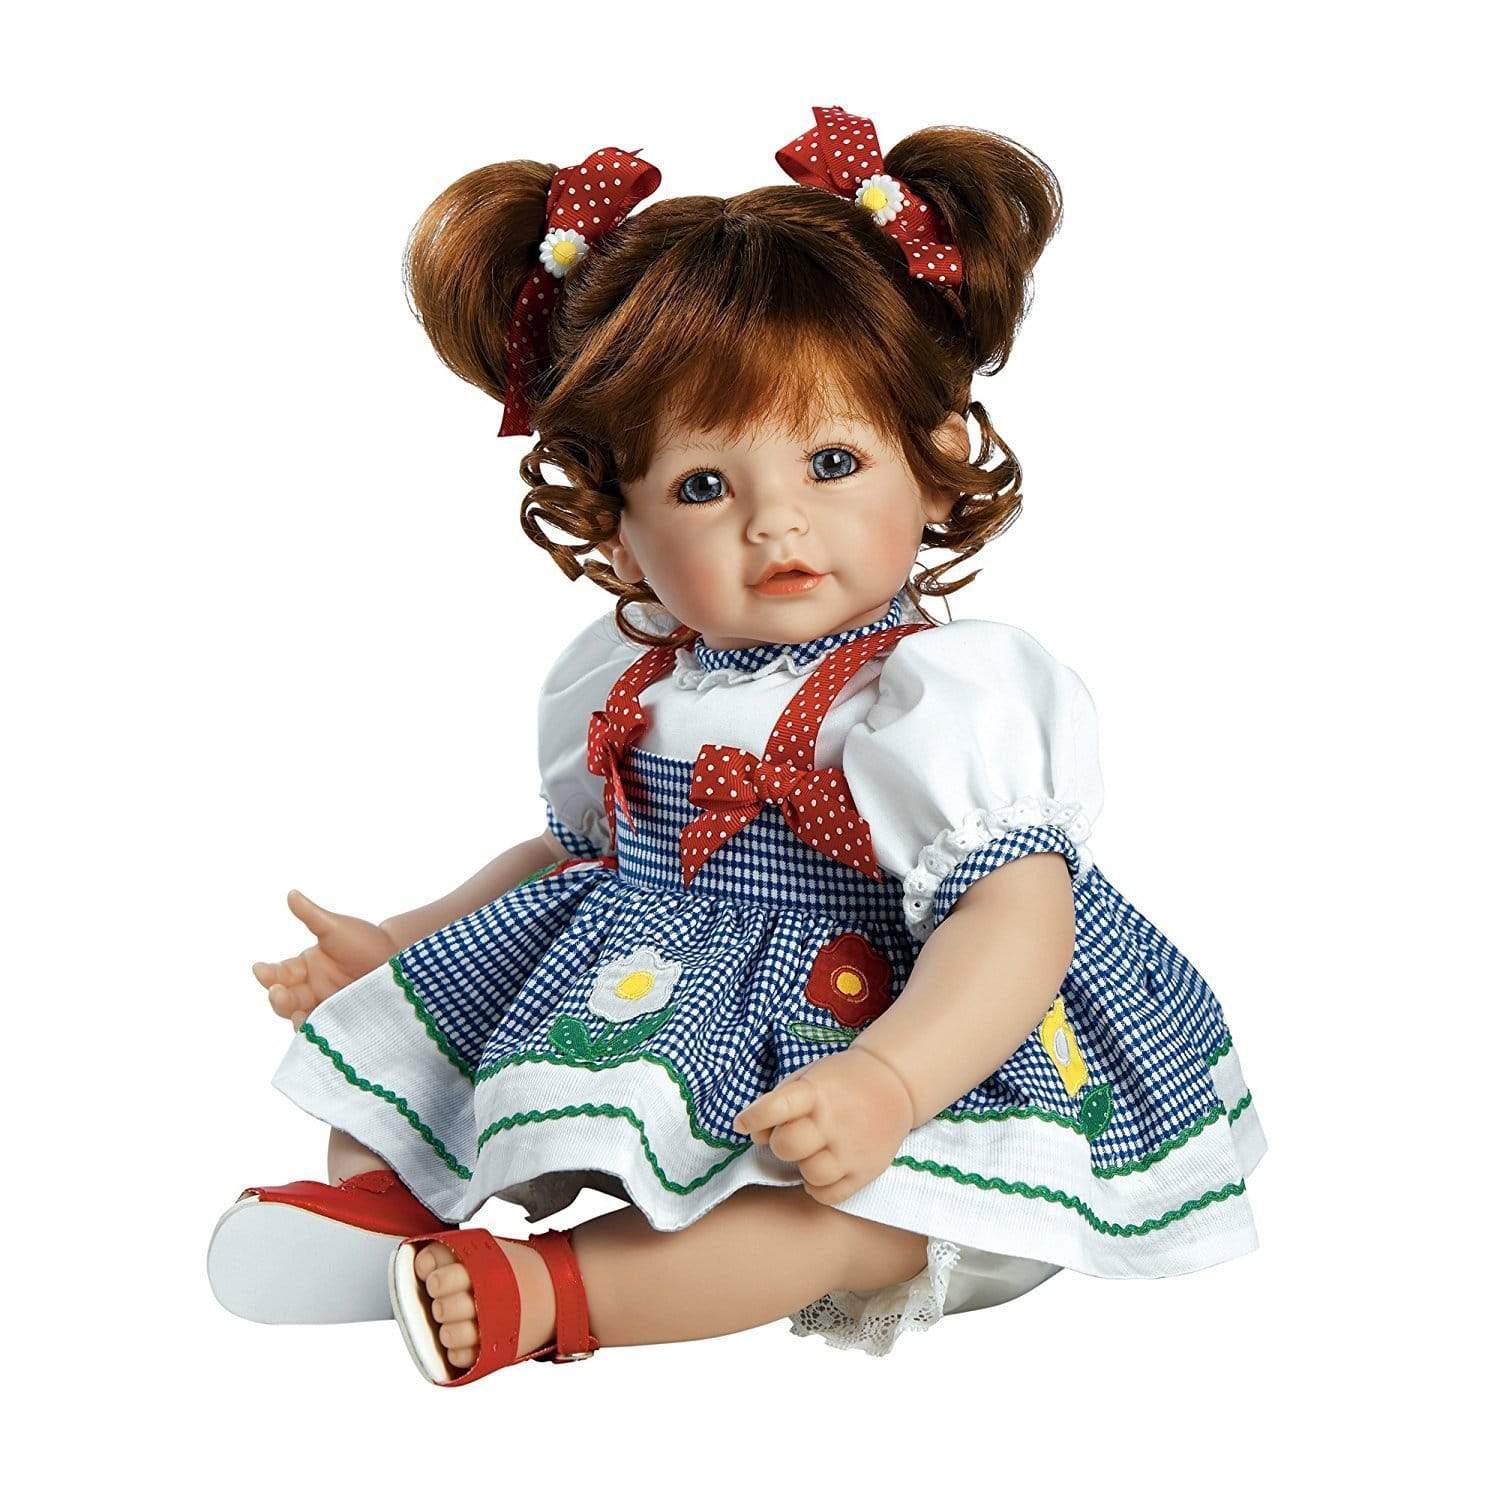 Adora Realistic Toddler Baby Dolls for Kids, 20 inch Daisy Delight